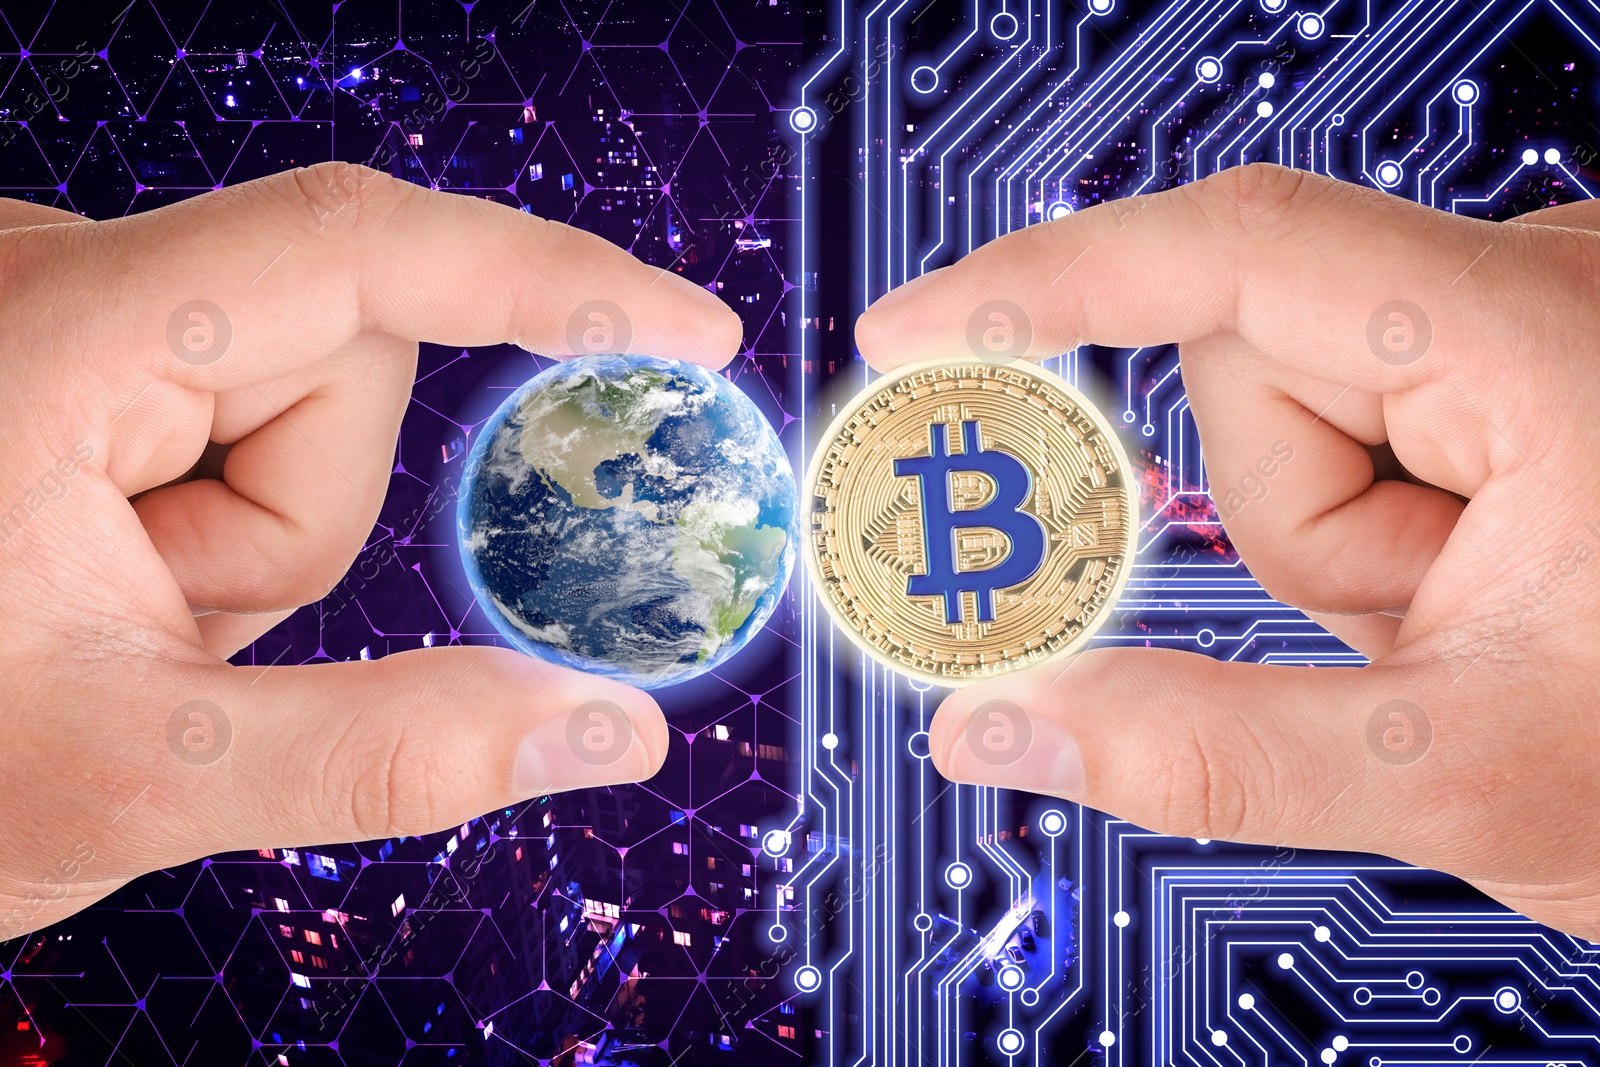 Image of World cryptocurrency. Man holding bitcoin and globe against digital scheme and blurred cityscape